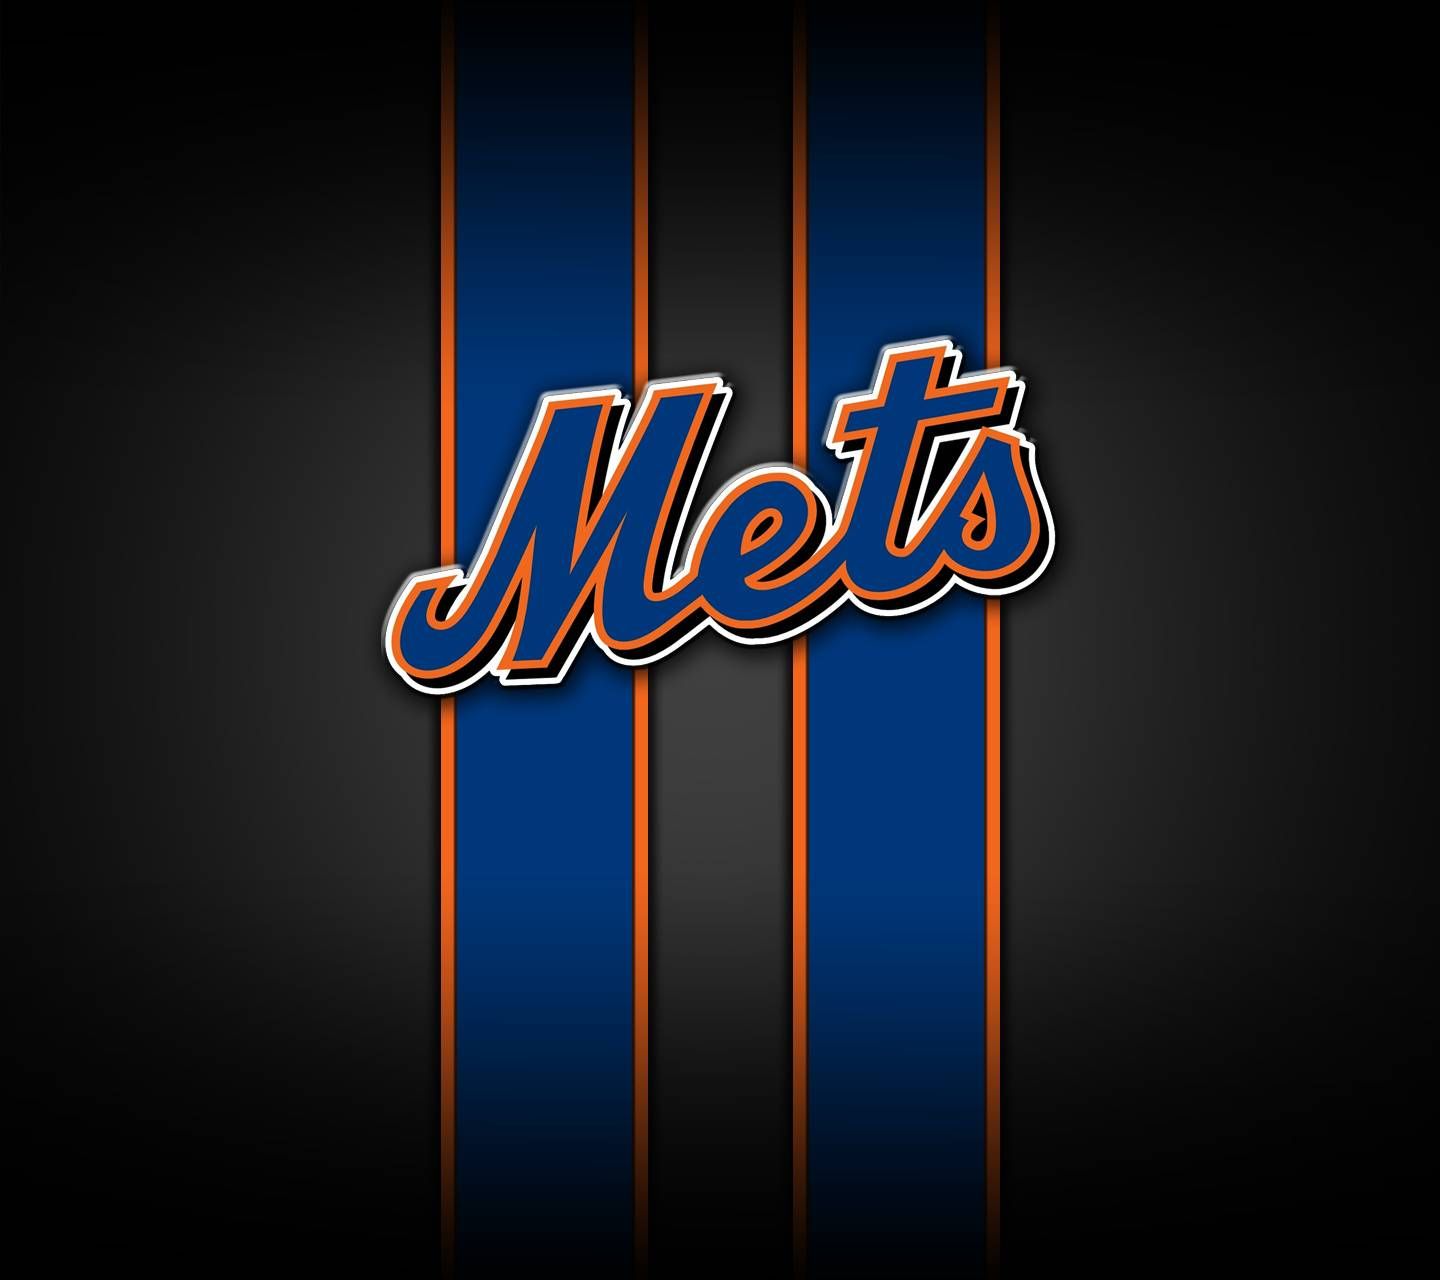 New York Mets on X: Your newest wallpaper. #WallpaperWednesday